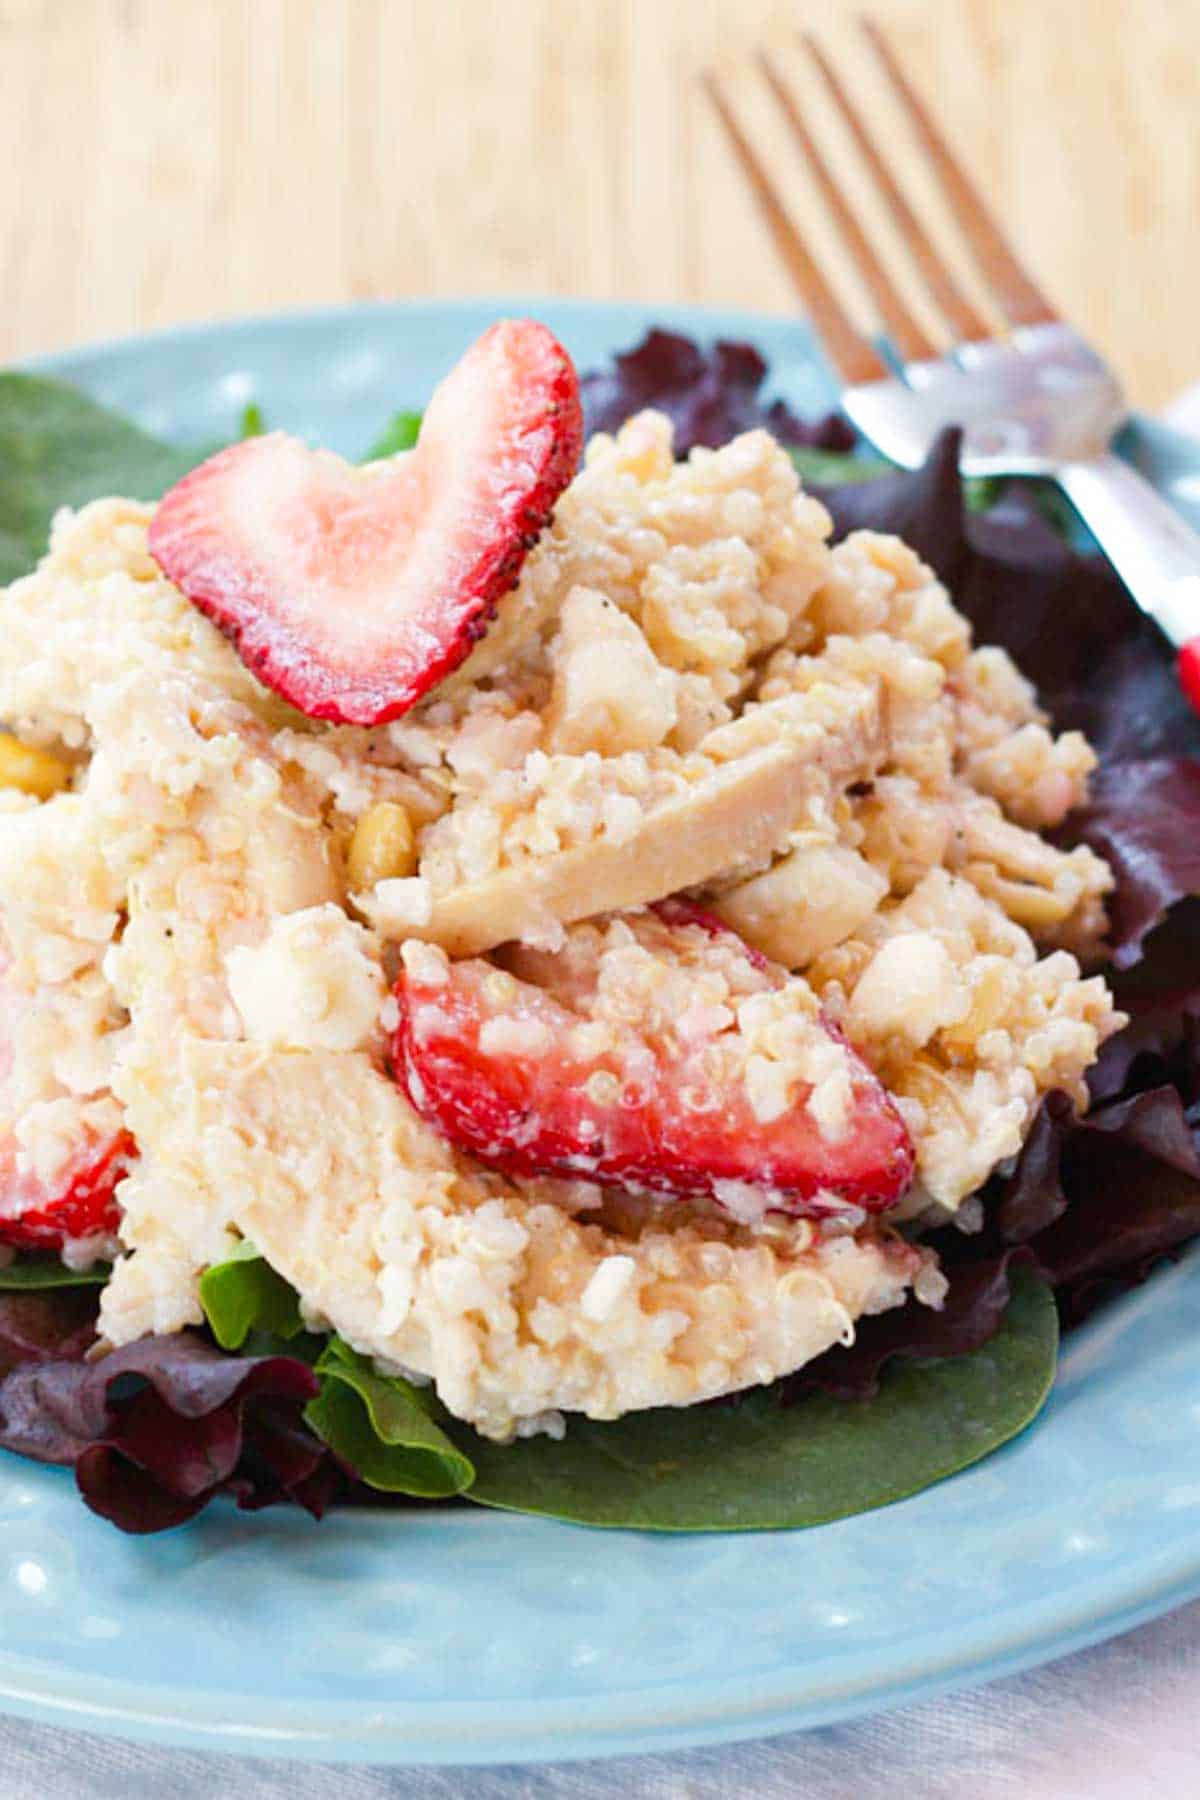 Strawberry Lime Quinoa Chicken Salad with Feta Cheese & PIne Nuts - healthy and delicious! | cupcakesandkalechips.com | #glutenfree #strawberries